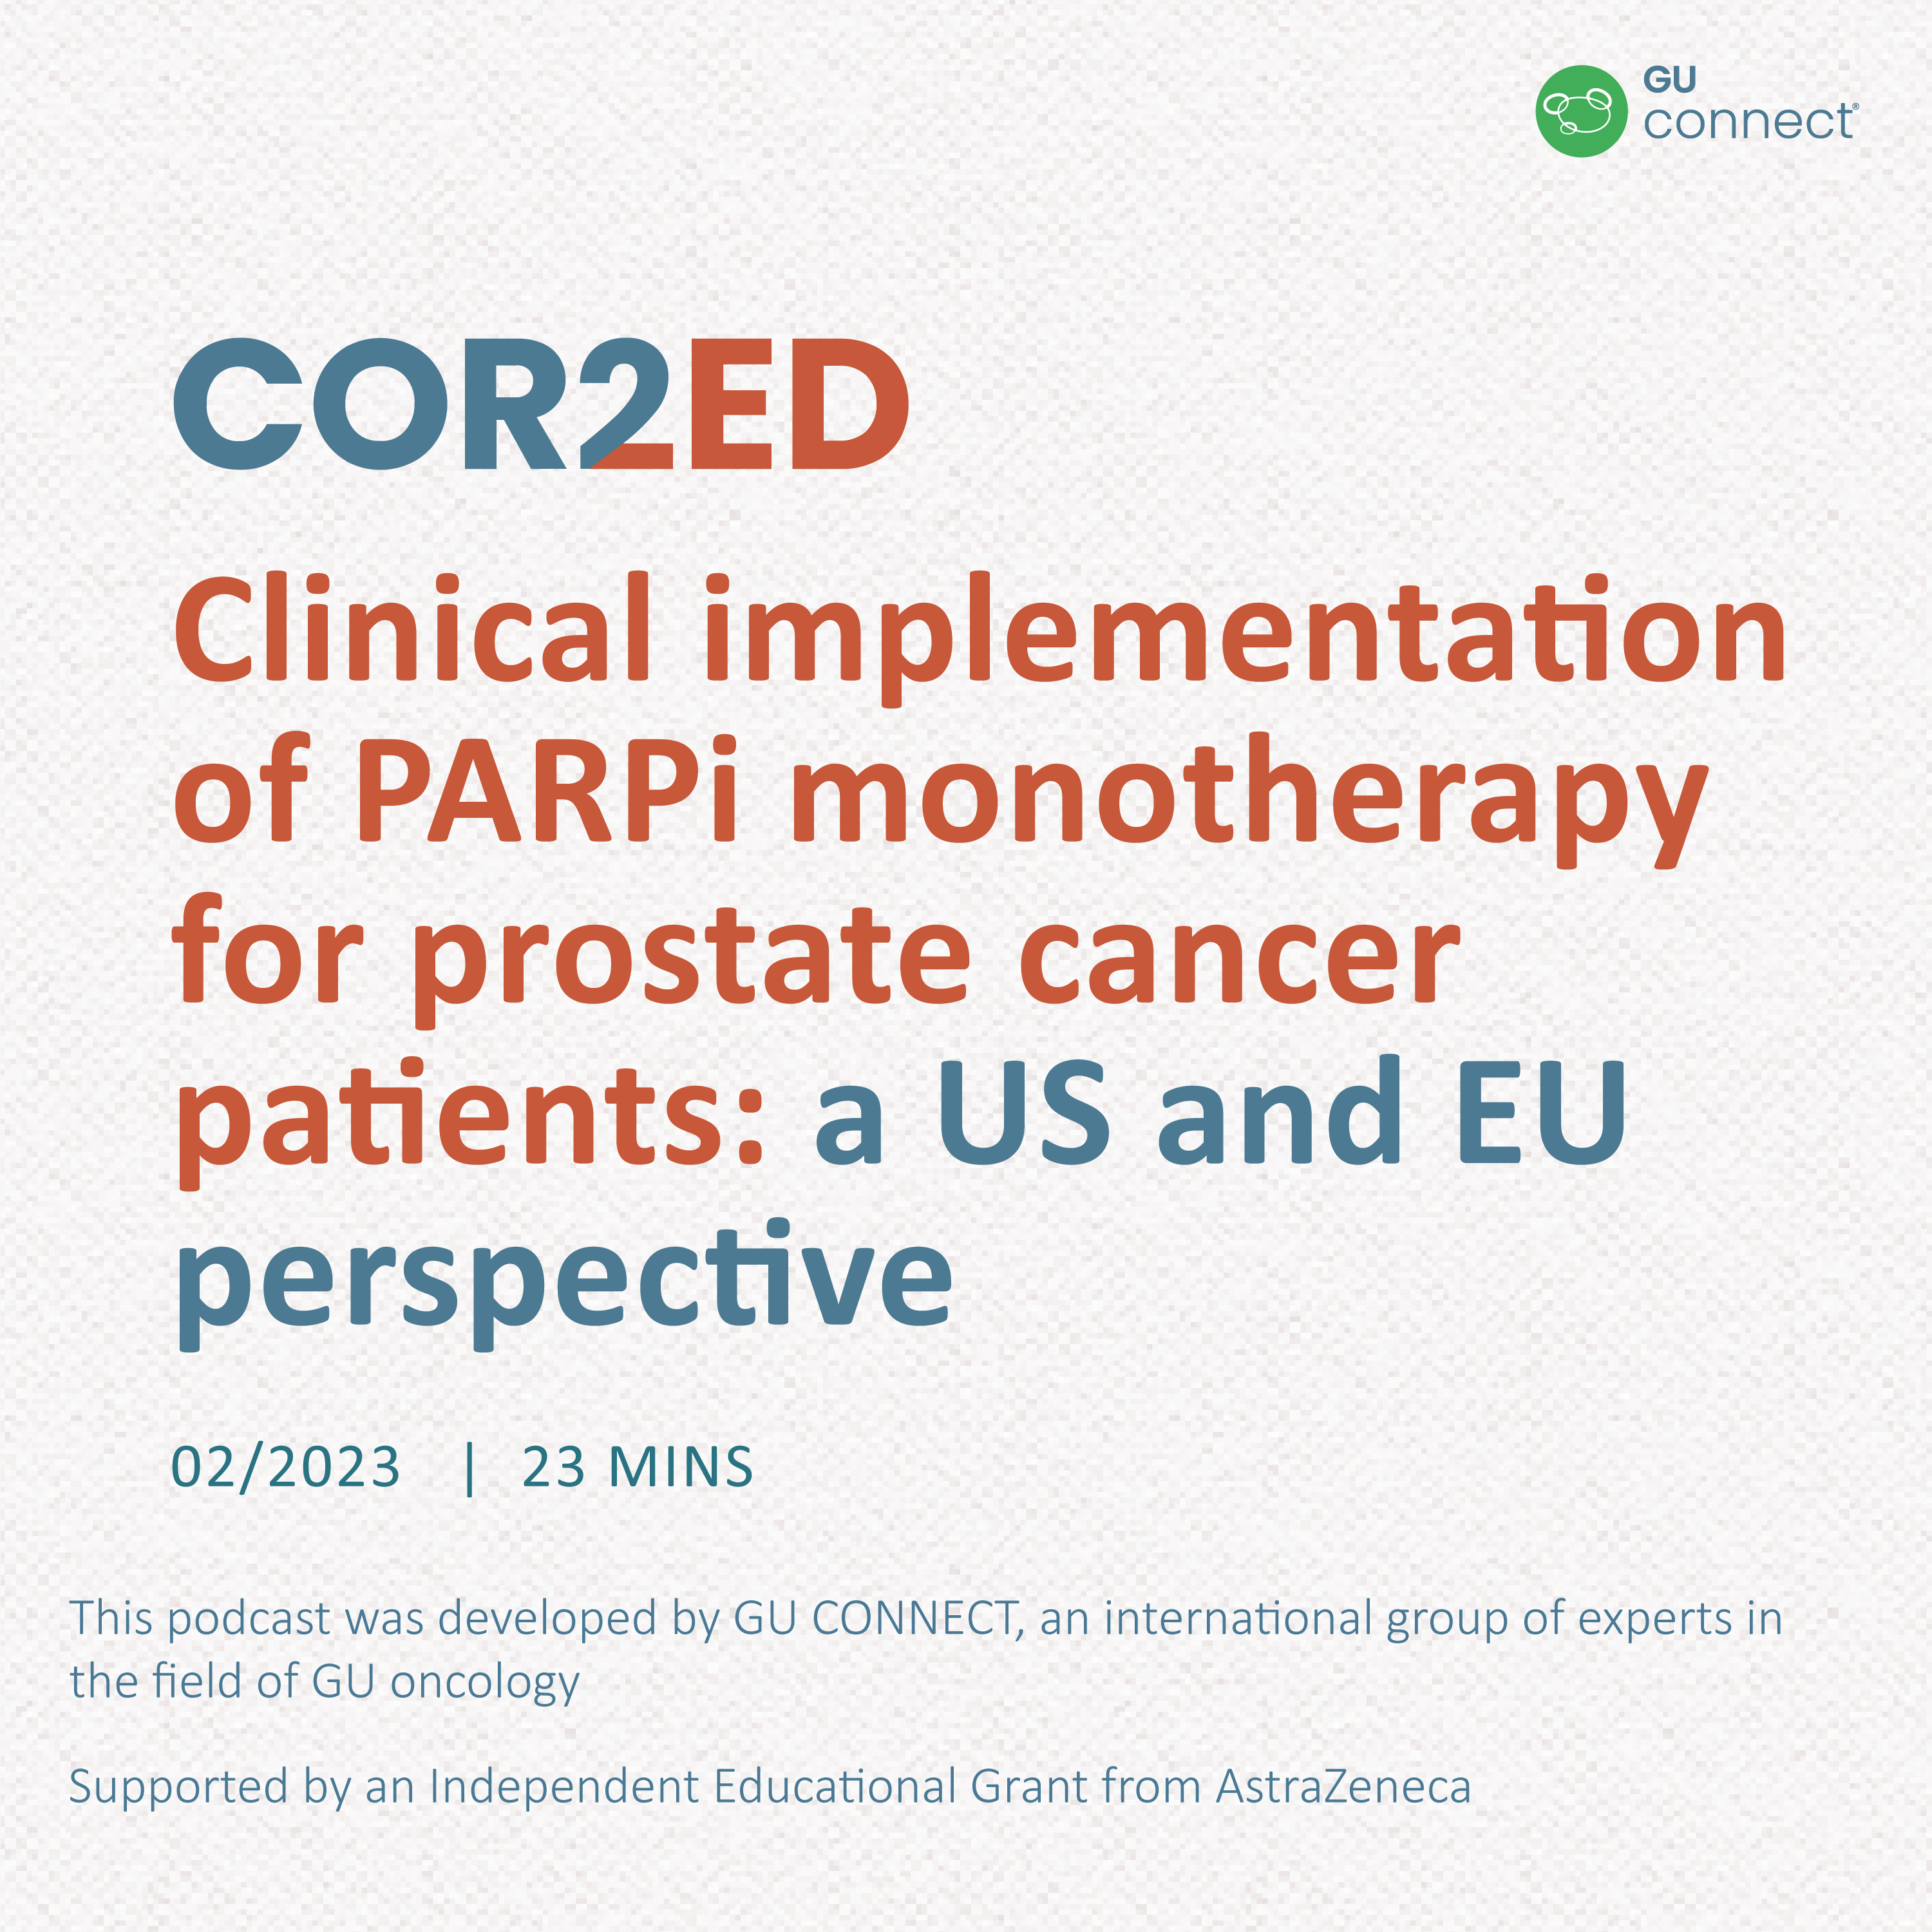 Clinical implementation of PARPi monotherapy for prostate cancer patients – a US and EU perspective